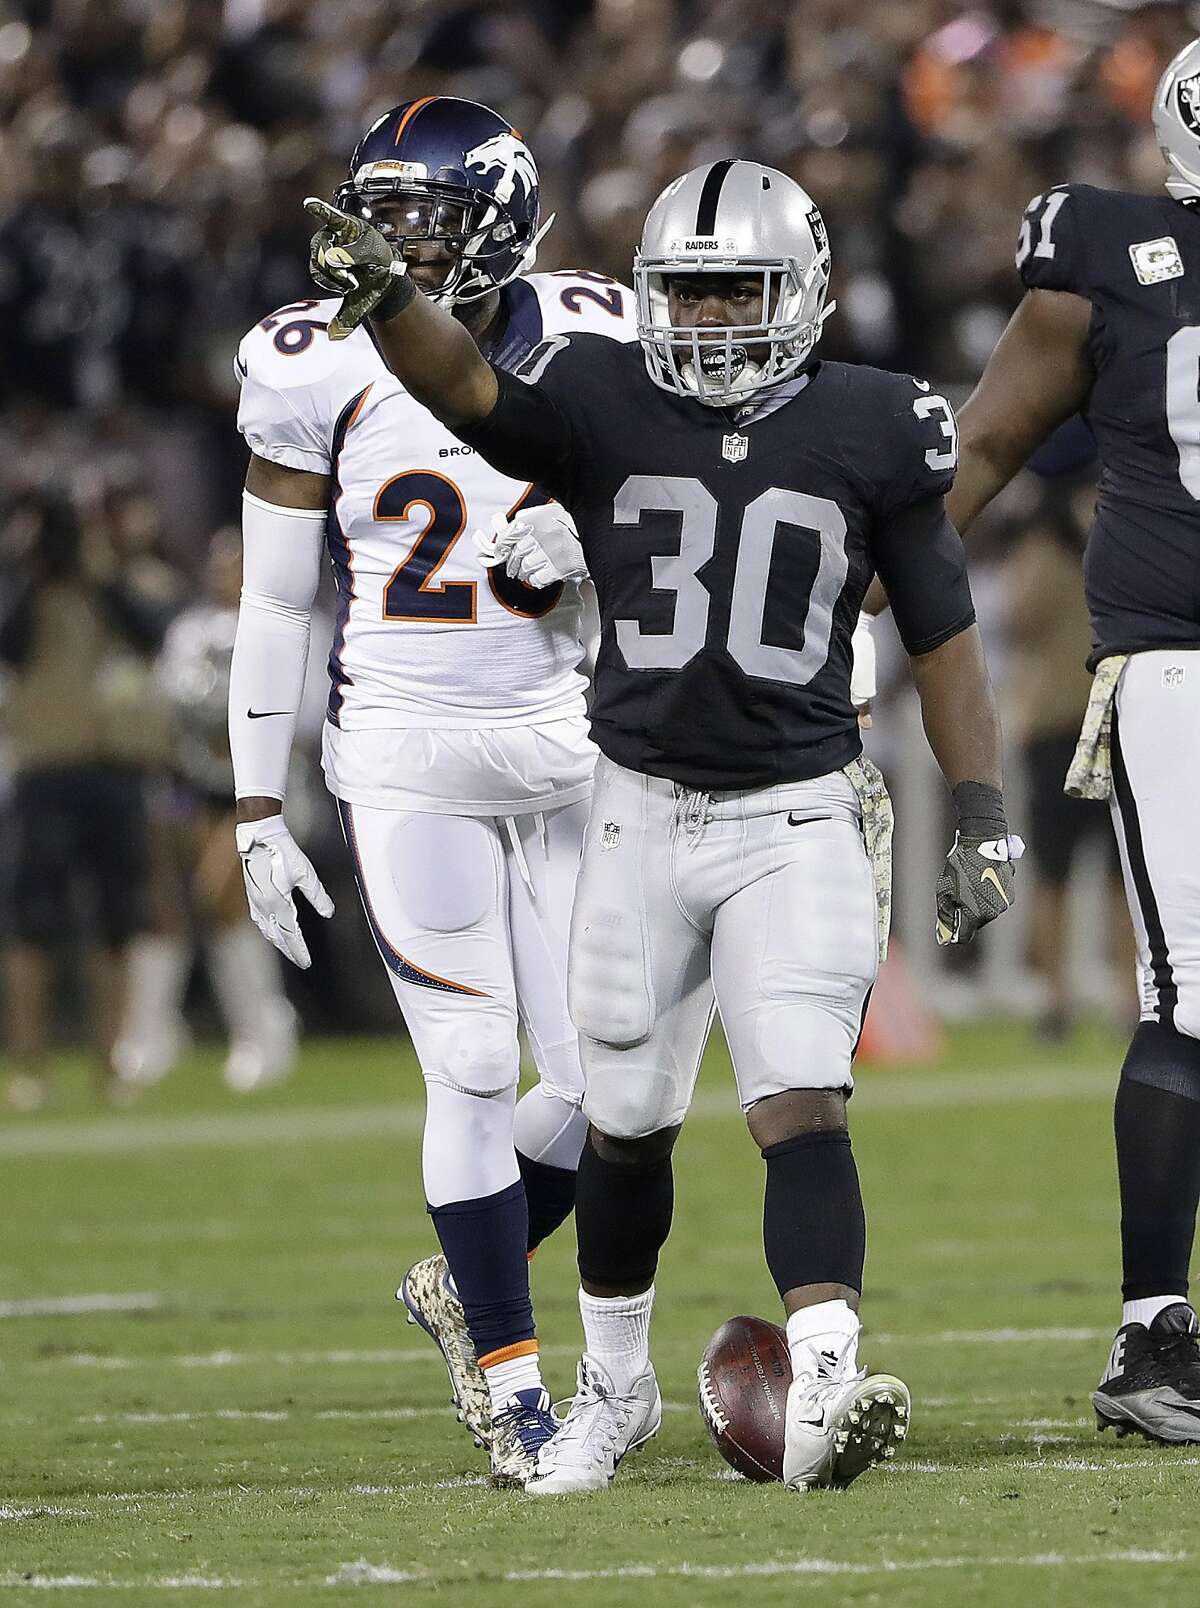 Oakland Raiders running back Jalen Richard (30) gestures in front of Denver Broncos free safety Darian Stewart (26) during the first half of an NFL football game in Oakland, Calif., Sunday, Nov. 6, 2016. (AP Photo/Marcio Jose Sanchez)